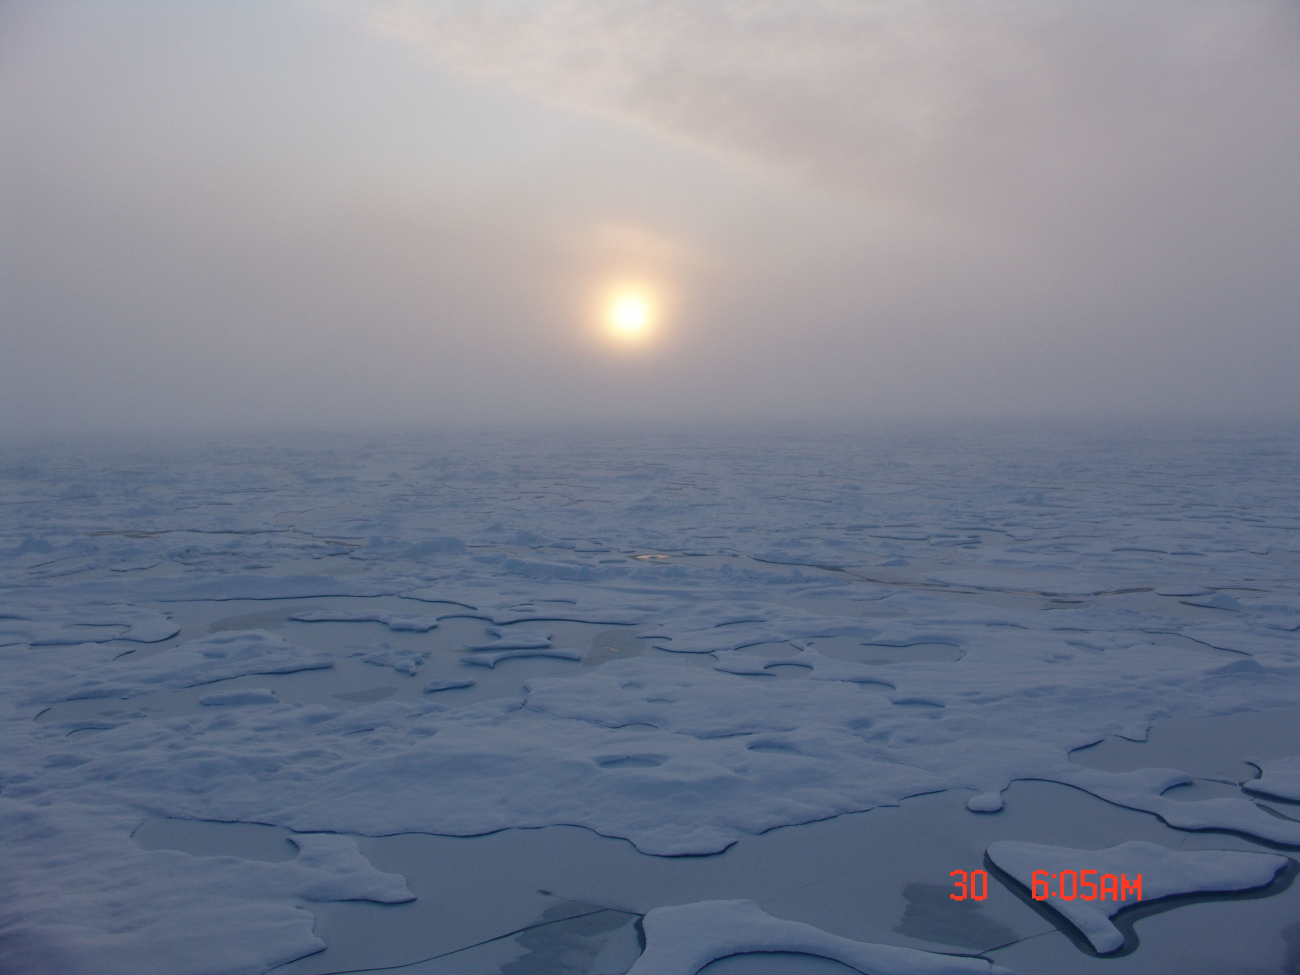 Sun seen through the clouds seen over ice floes and melt ponds